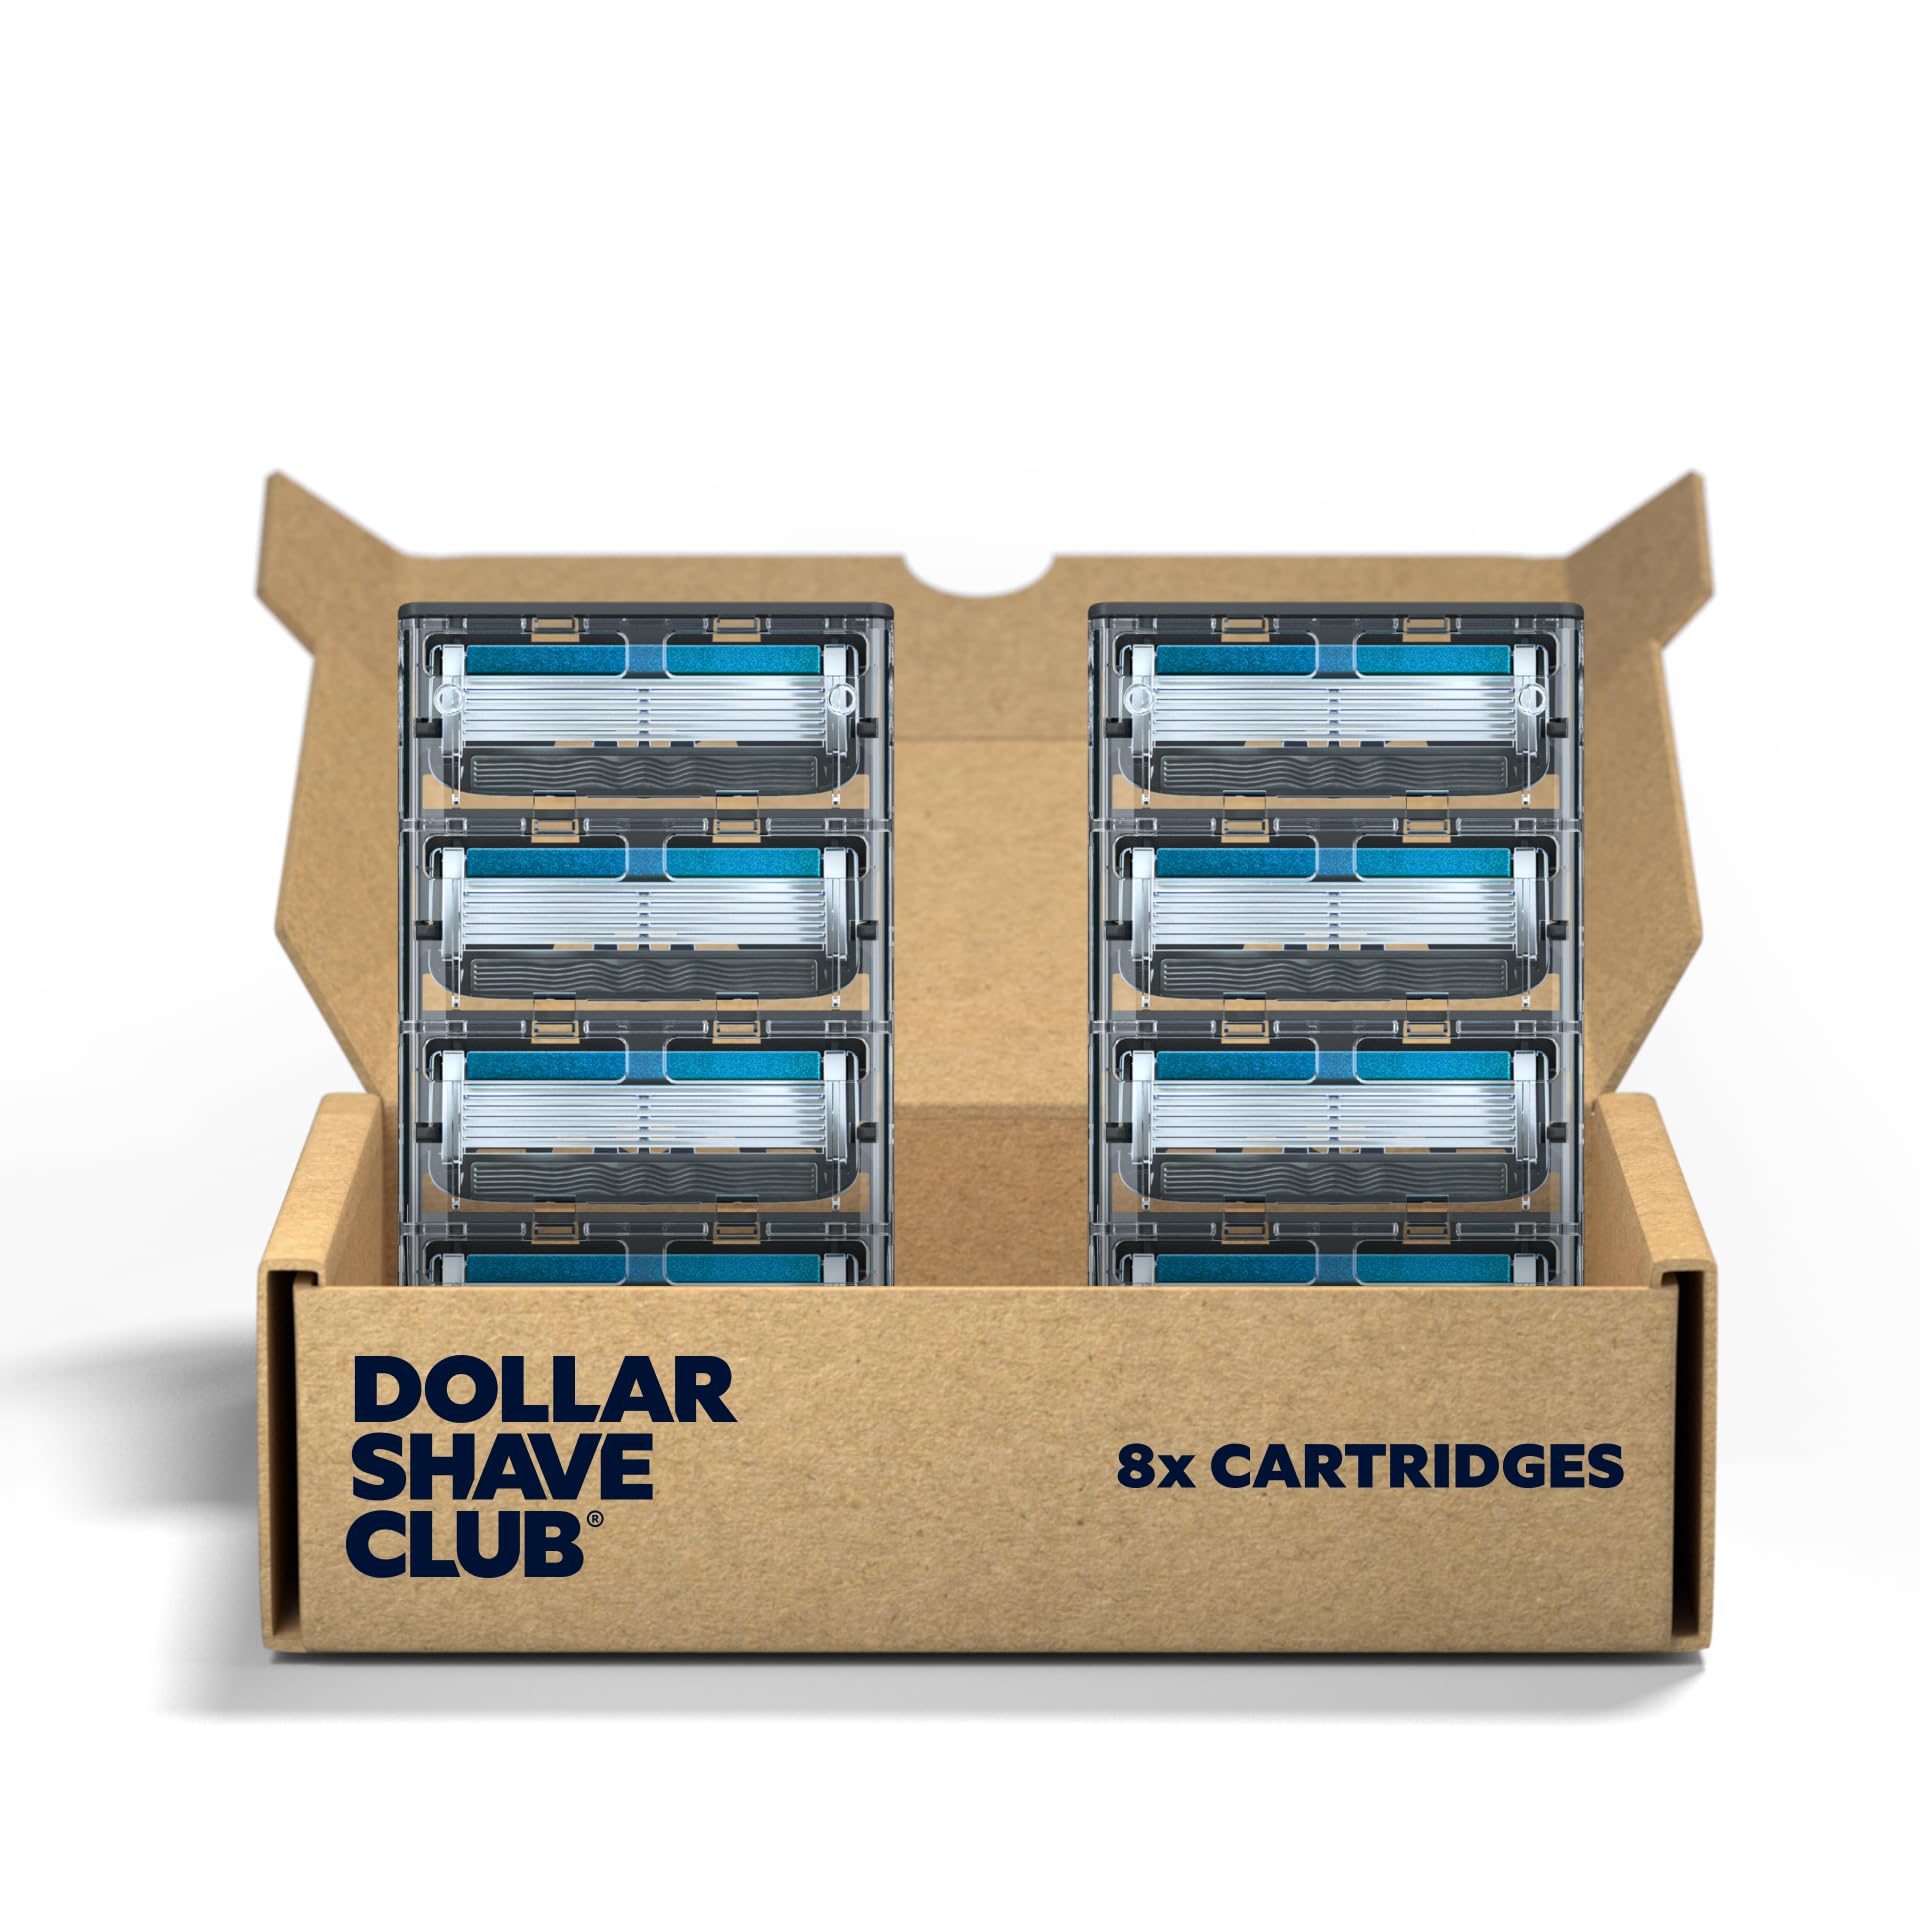 Dollar Shave Club 8 Count 6 Blade Razor Refills with Built-in Trimmer - Not Compatible with Heritage/Executive Razors